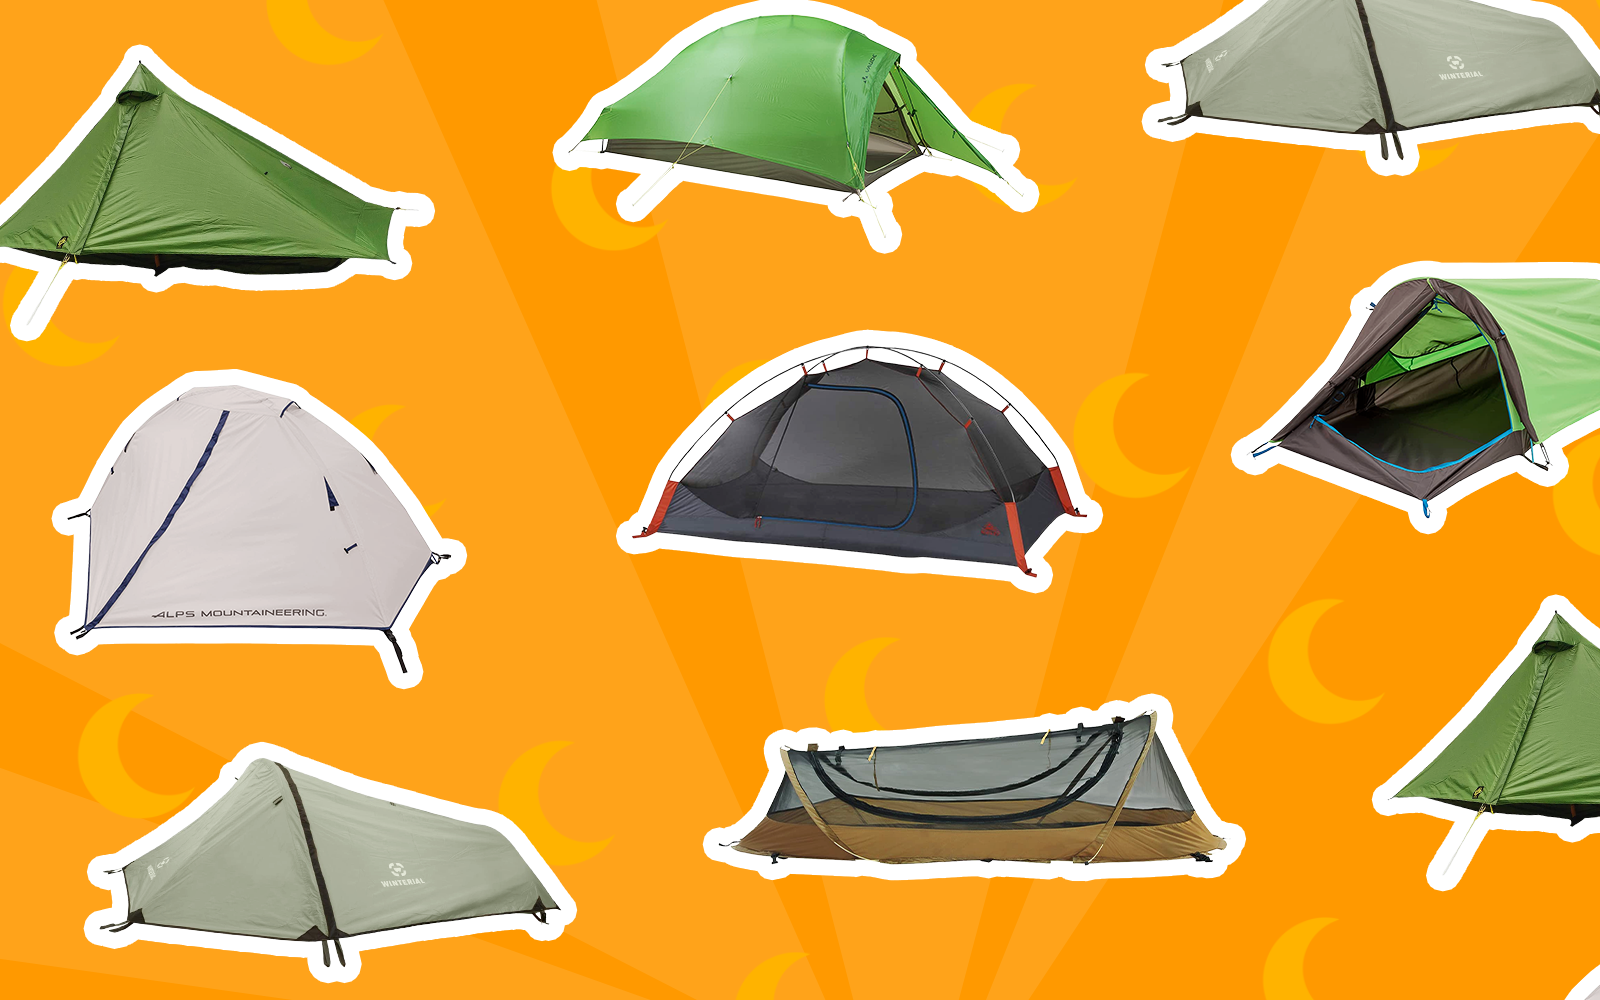 The 7 Best One-Man Tents to Buy in 2022